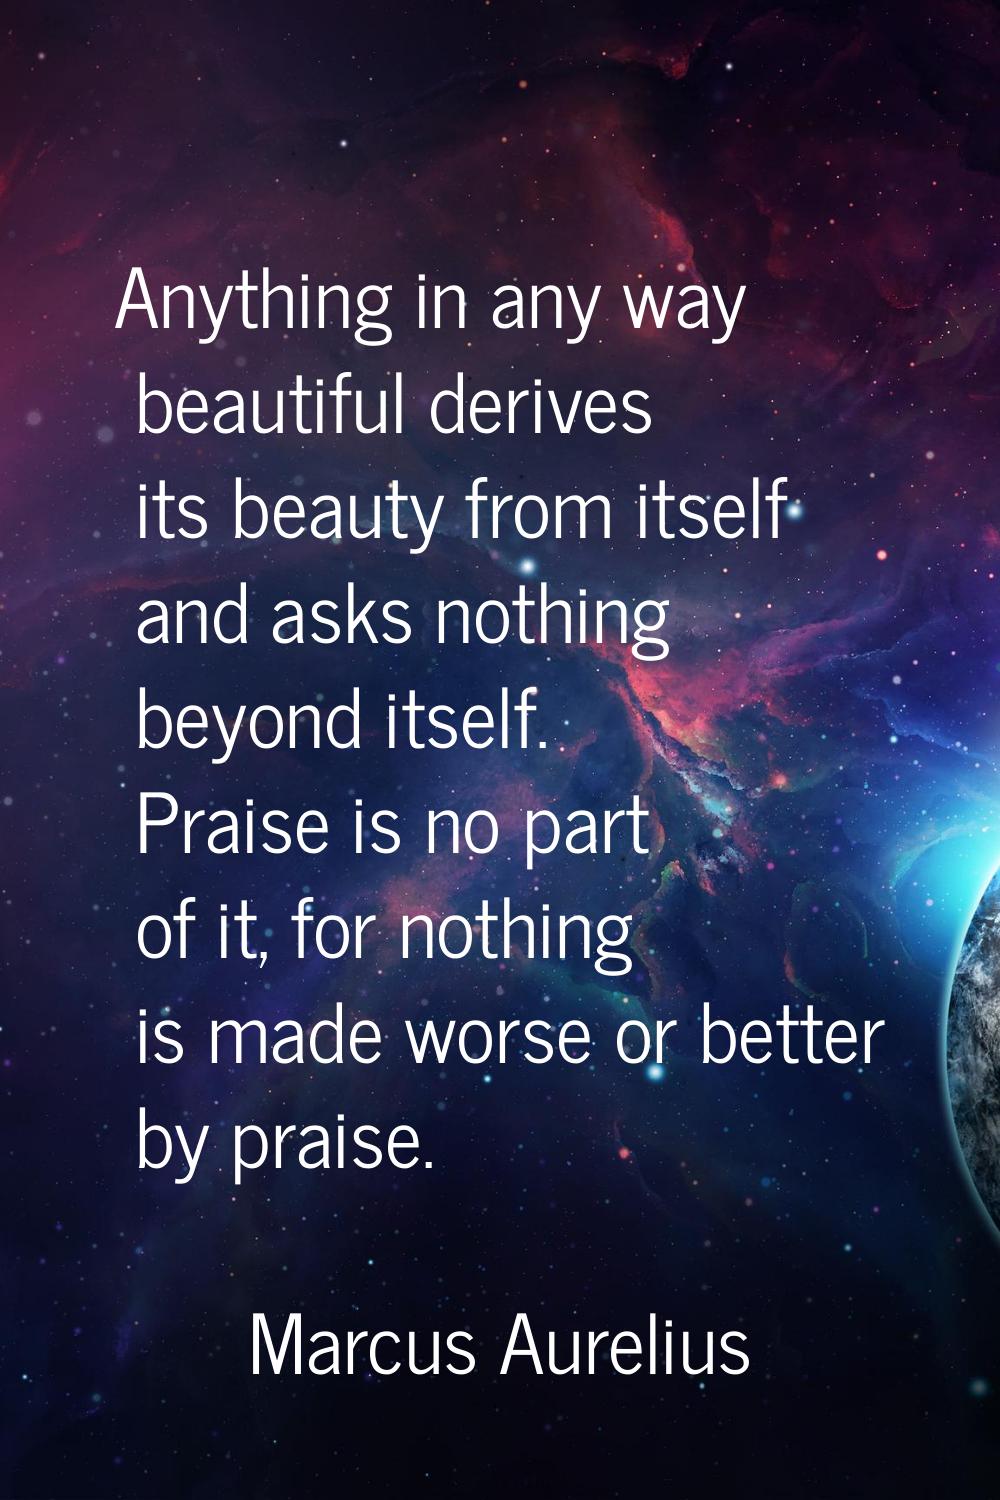 Anything in any way beautiful derives its beauty from itself and asks nothing beyond itself. Praise